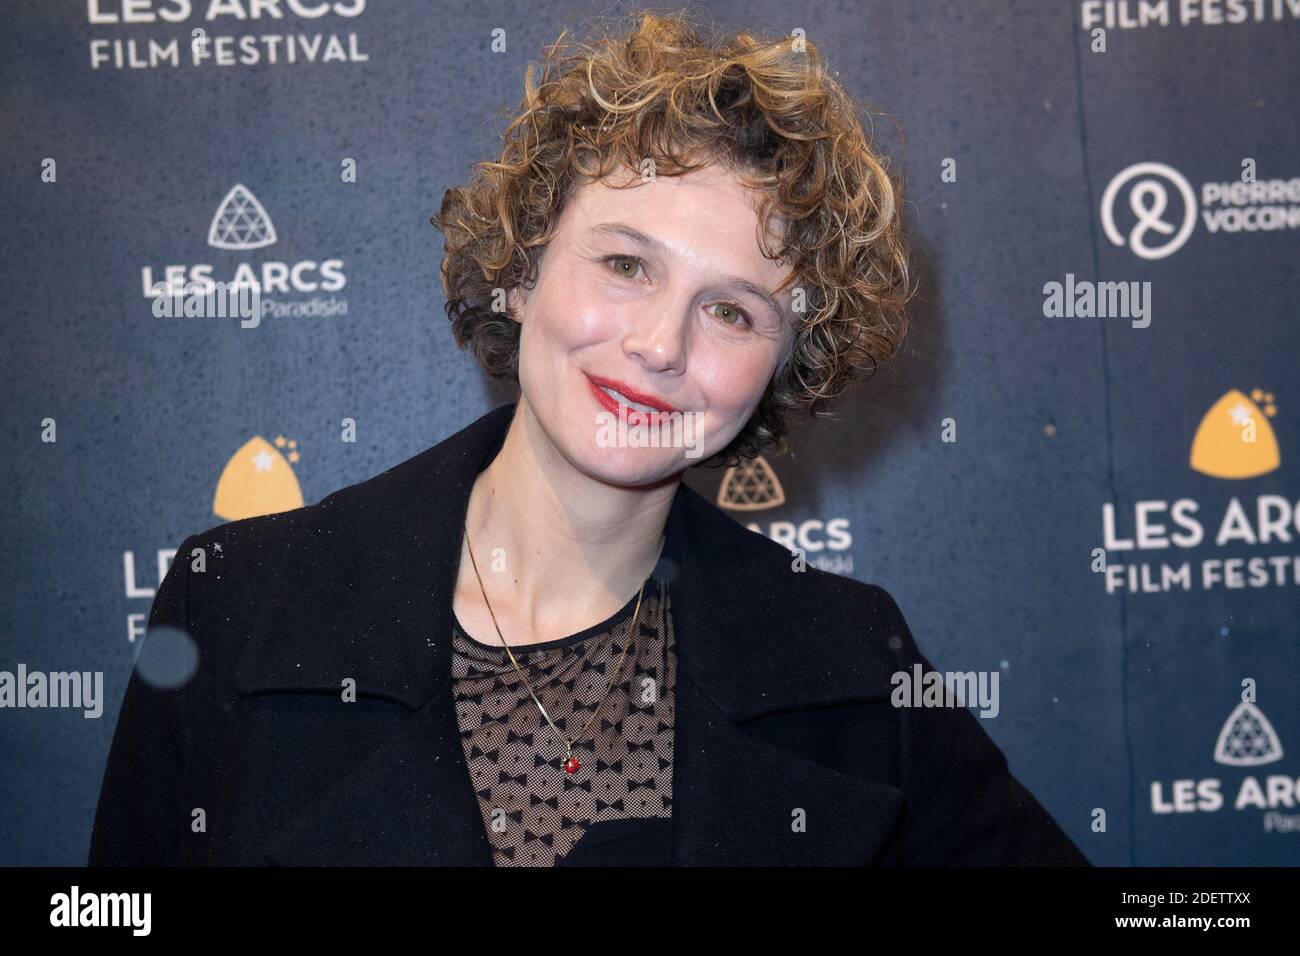 Anna Maria Sturm attending the Opening Ceremony of the 11th Les Arcs Film Festival in Les Arcs, France on December 14, 2019. Photo by Aurore Marechal/ABACAPRESS.COM Stock Photo